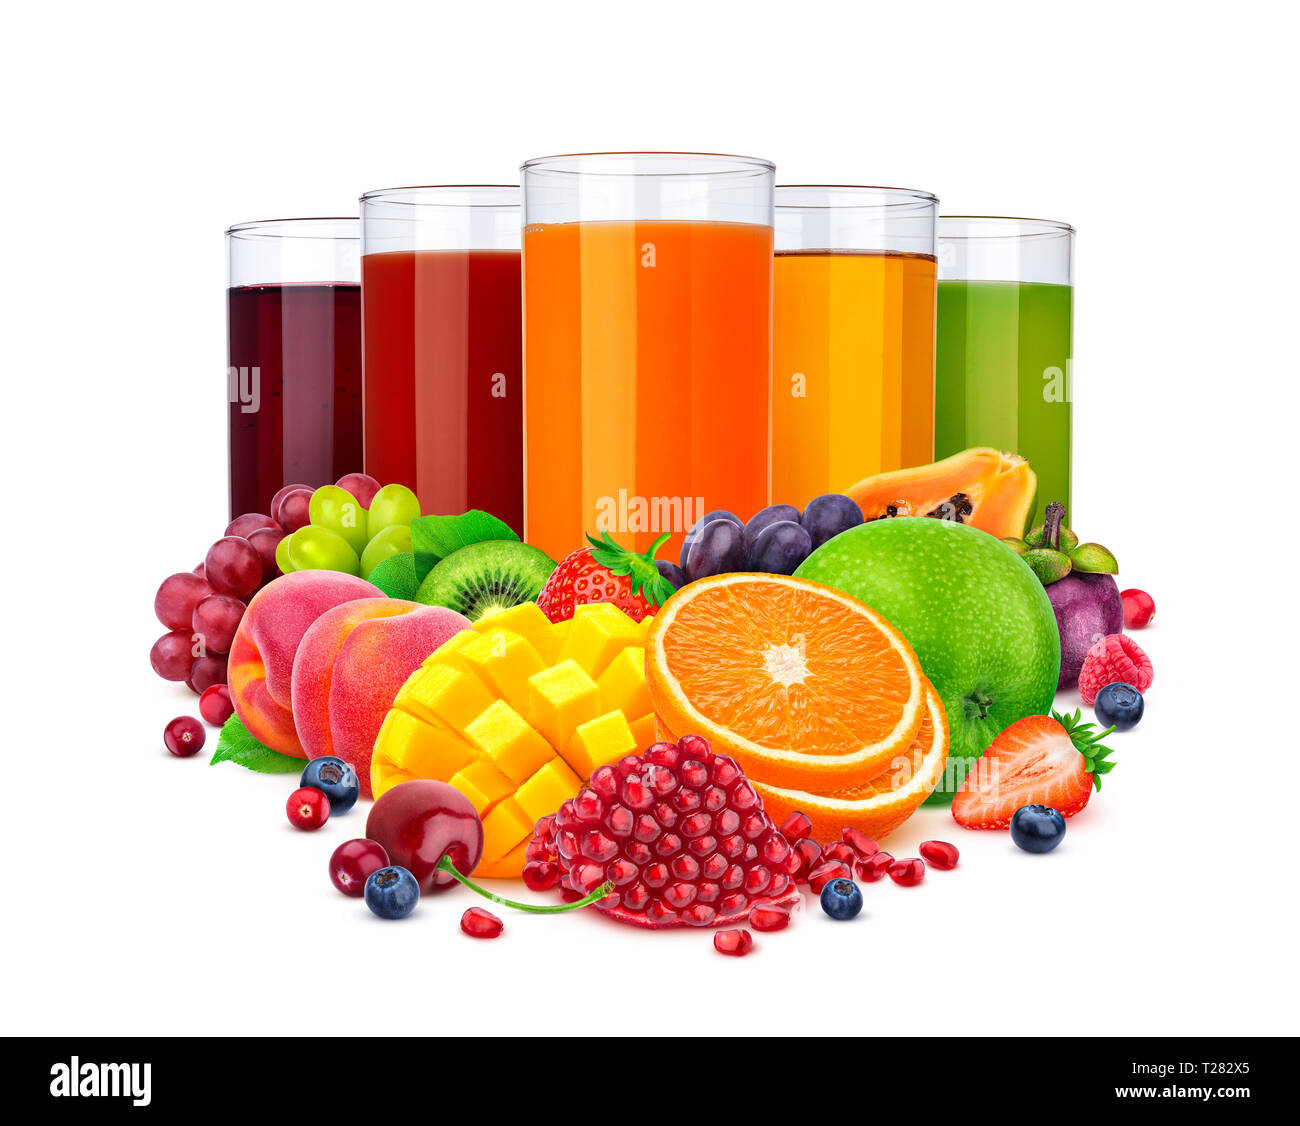 Glasses of different juice and pile of fruits and berries isolated on white background, collection of fresh and healthy drinks Stock Photo